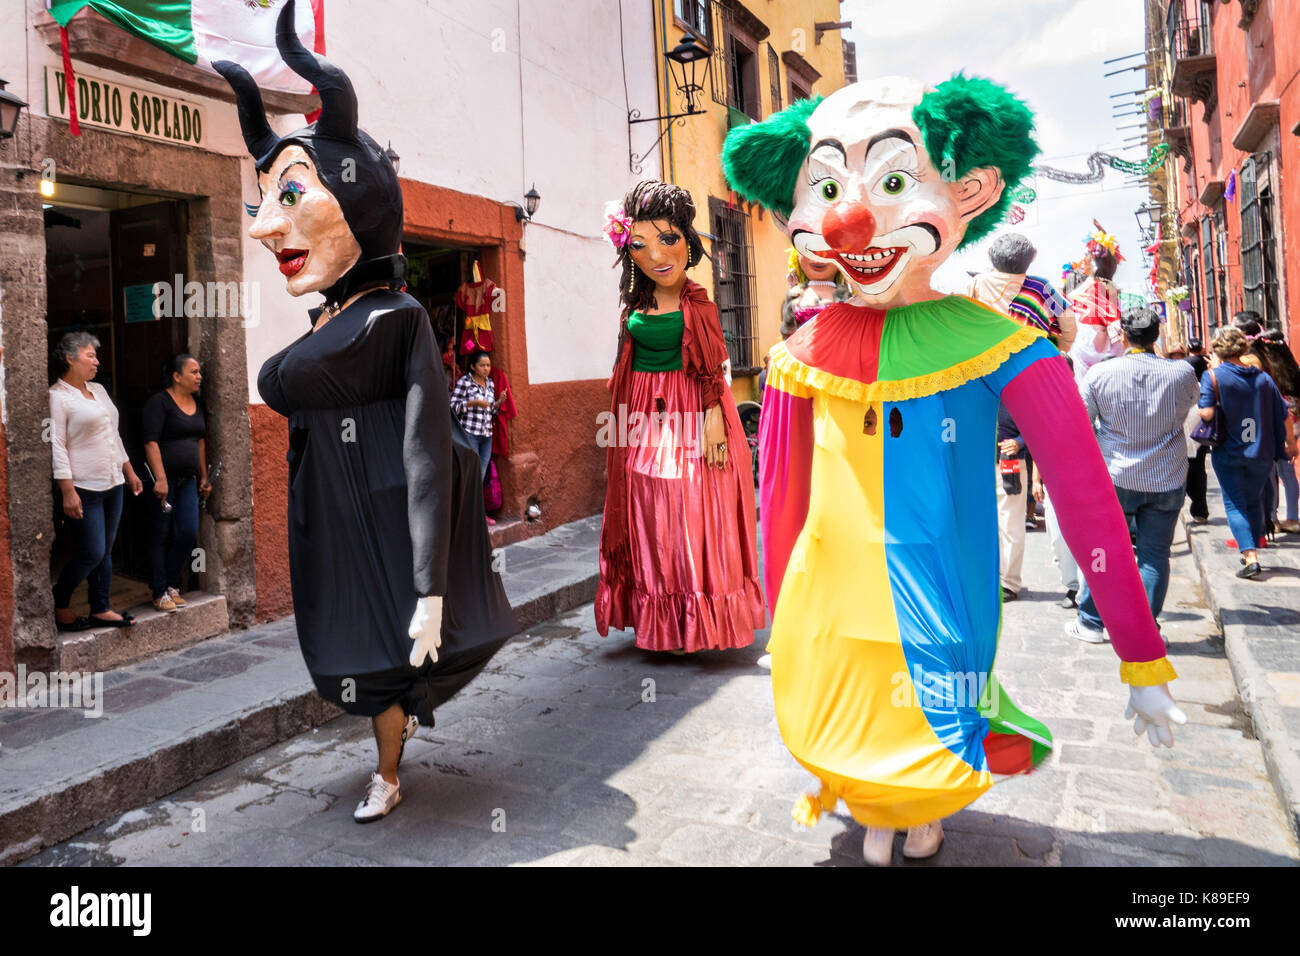 Giant papier mache puppets called mojigangas dance in the streets during a children's parade celebrating Mexican Independence Day celebrations September 17, 2017 in San Miguel de Allende, Mexico. Stock Photo